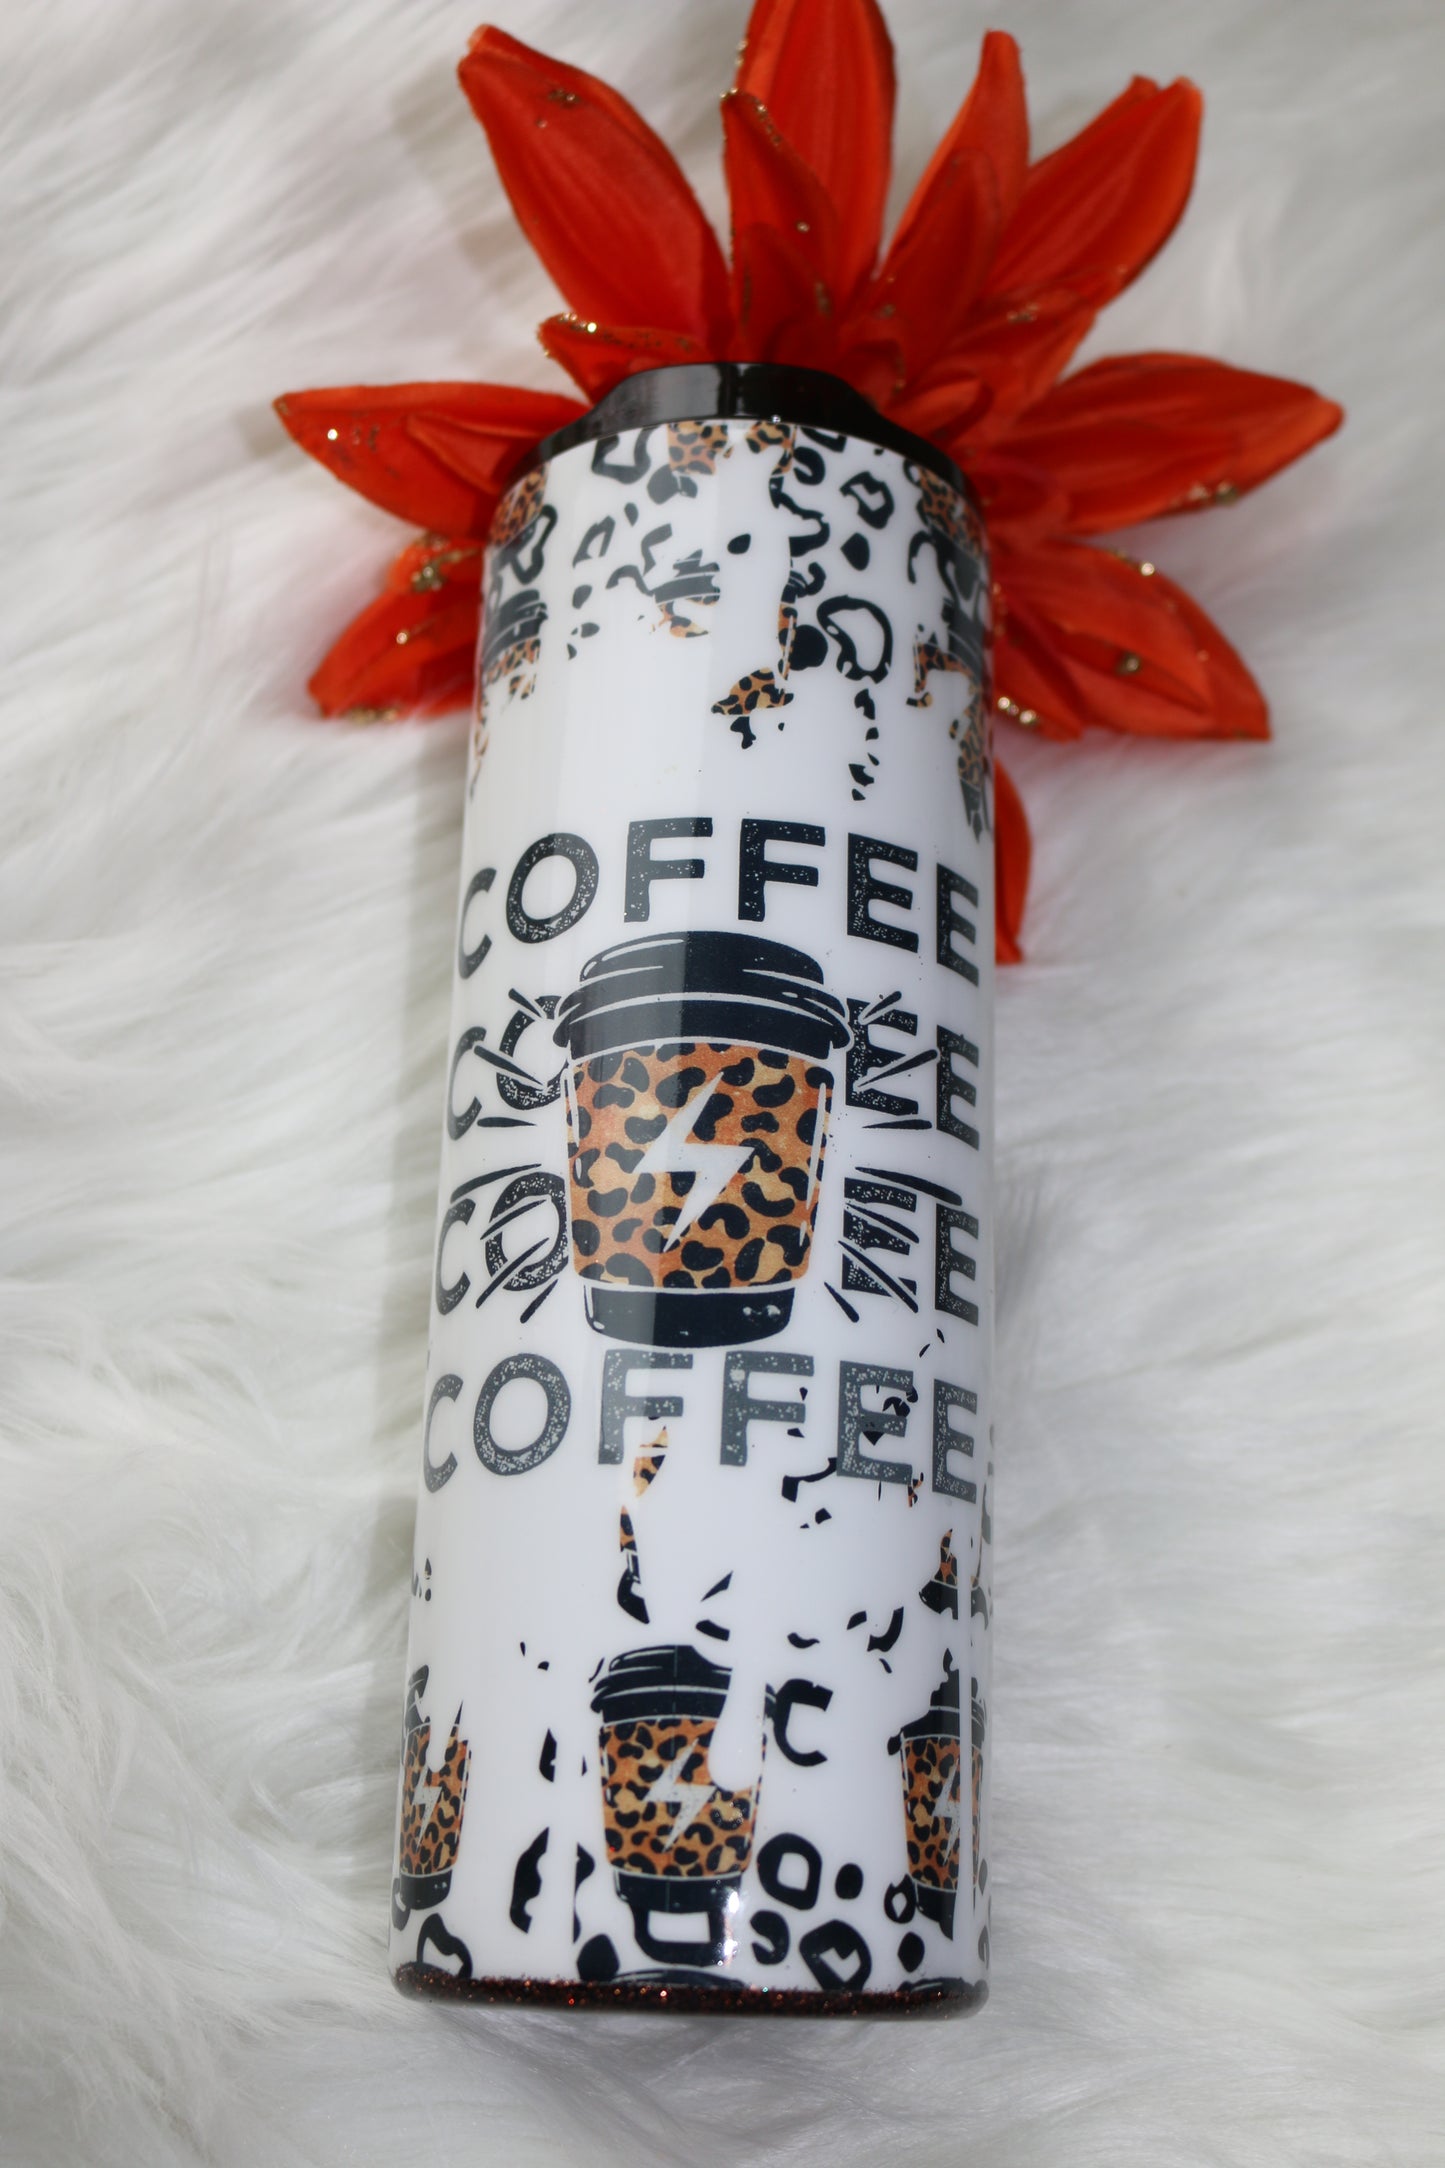 20 oz COFFEE Stainless Steal Tumbler